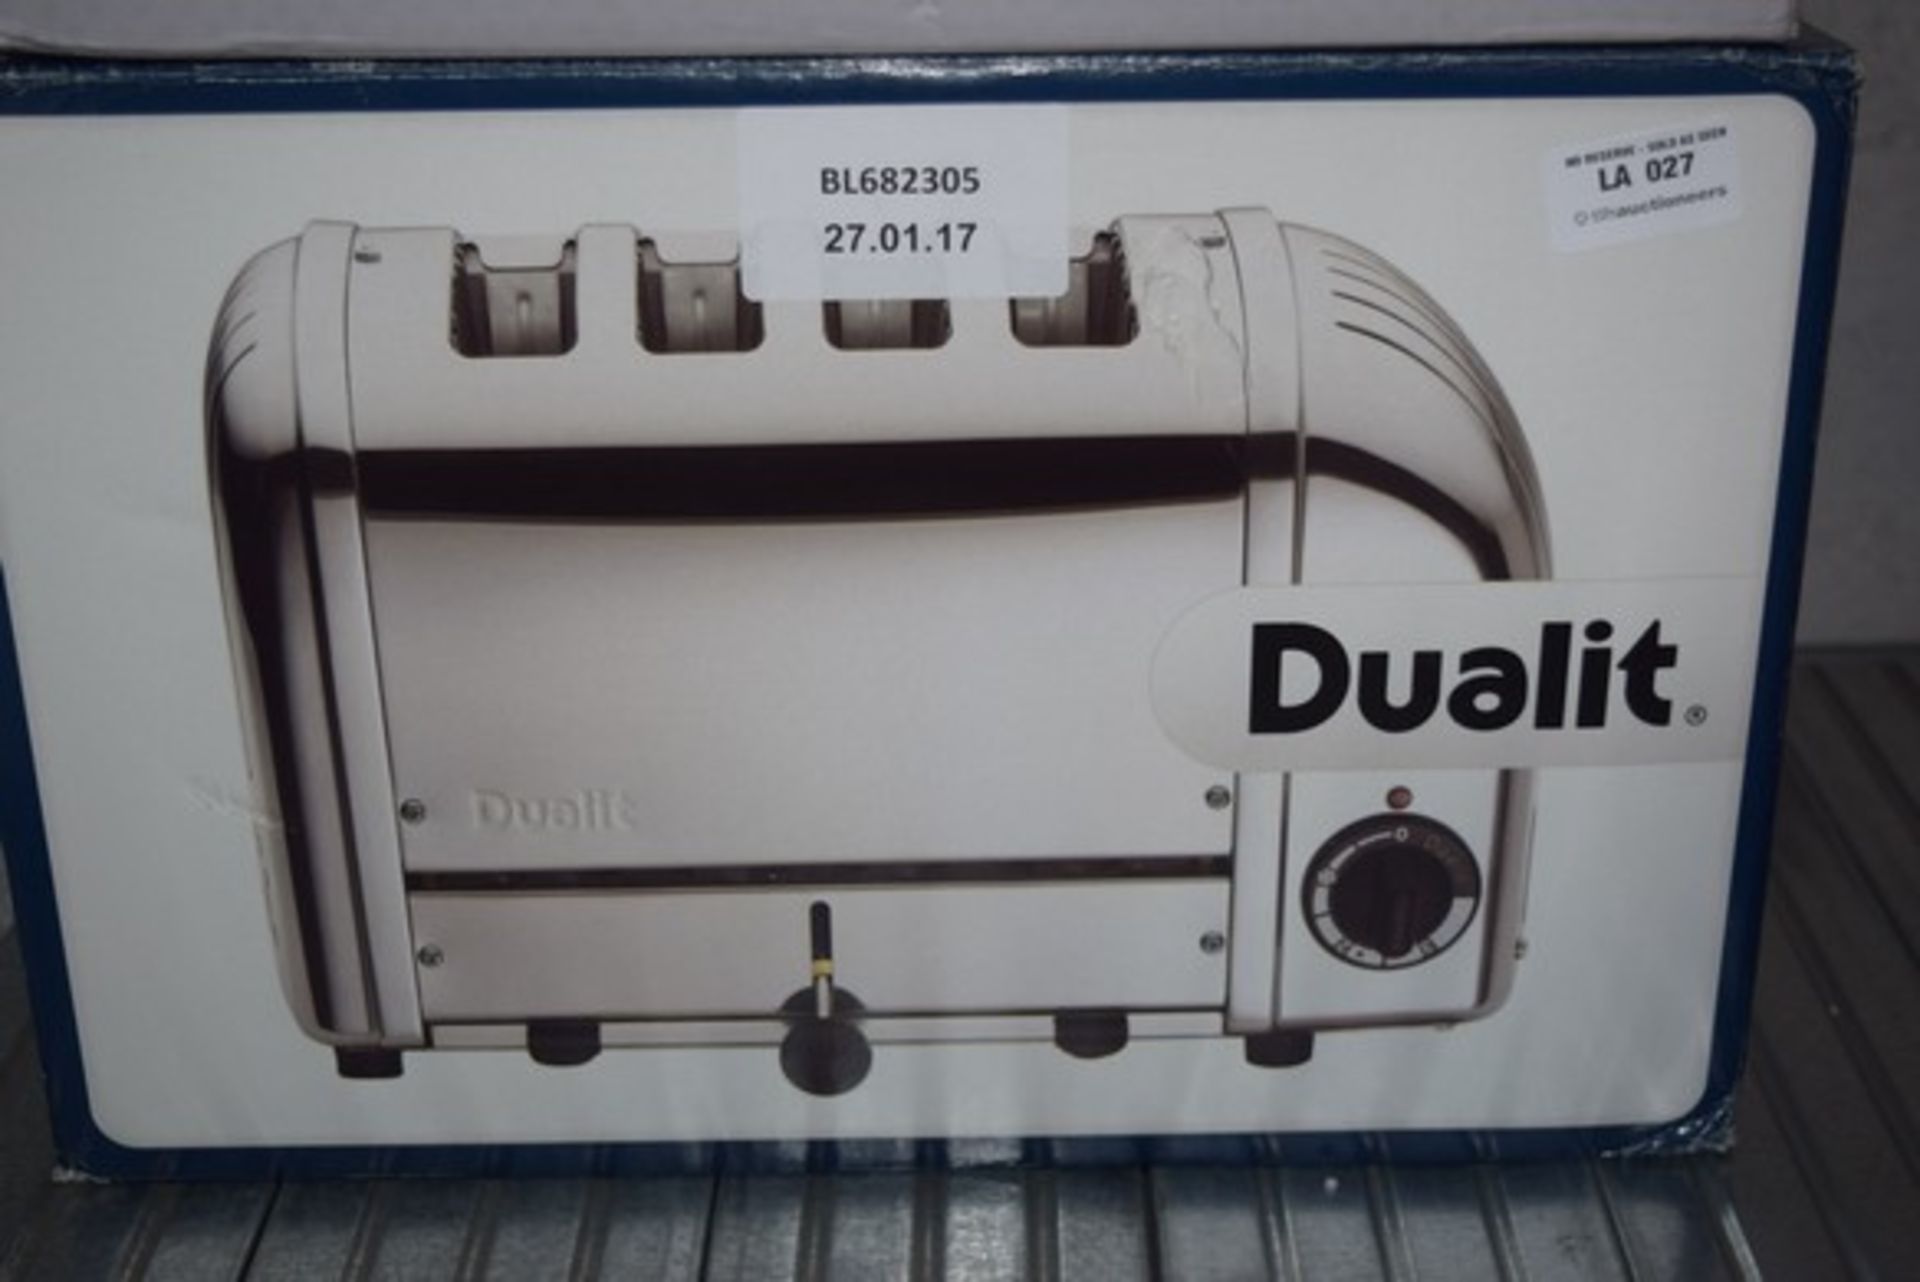 1 X BOXED DUALIT 4 SLICE TOASTER RRP £120 27.01.17